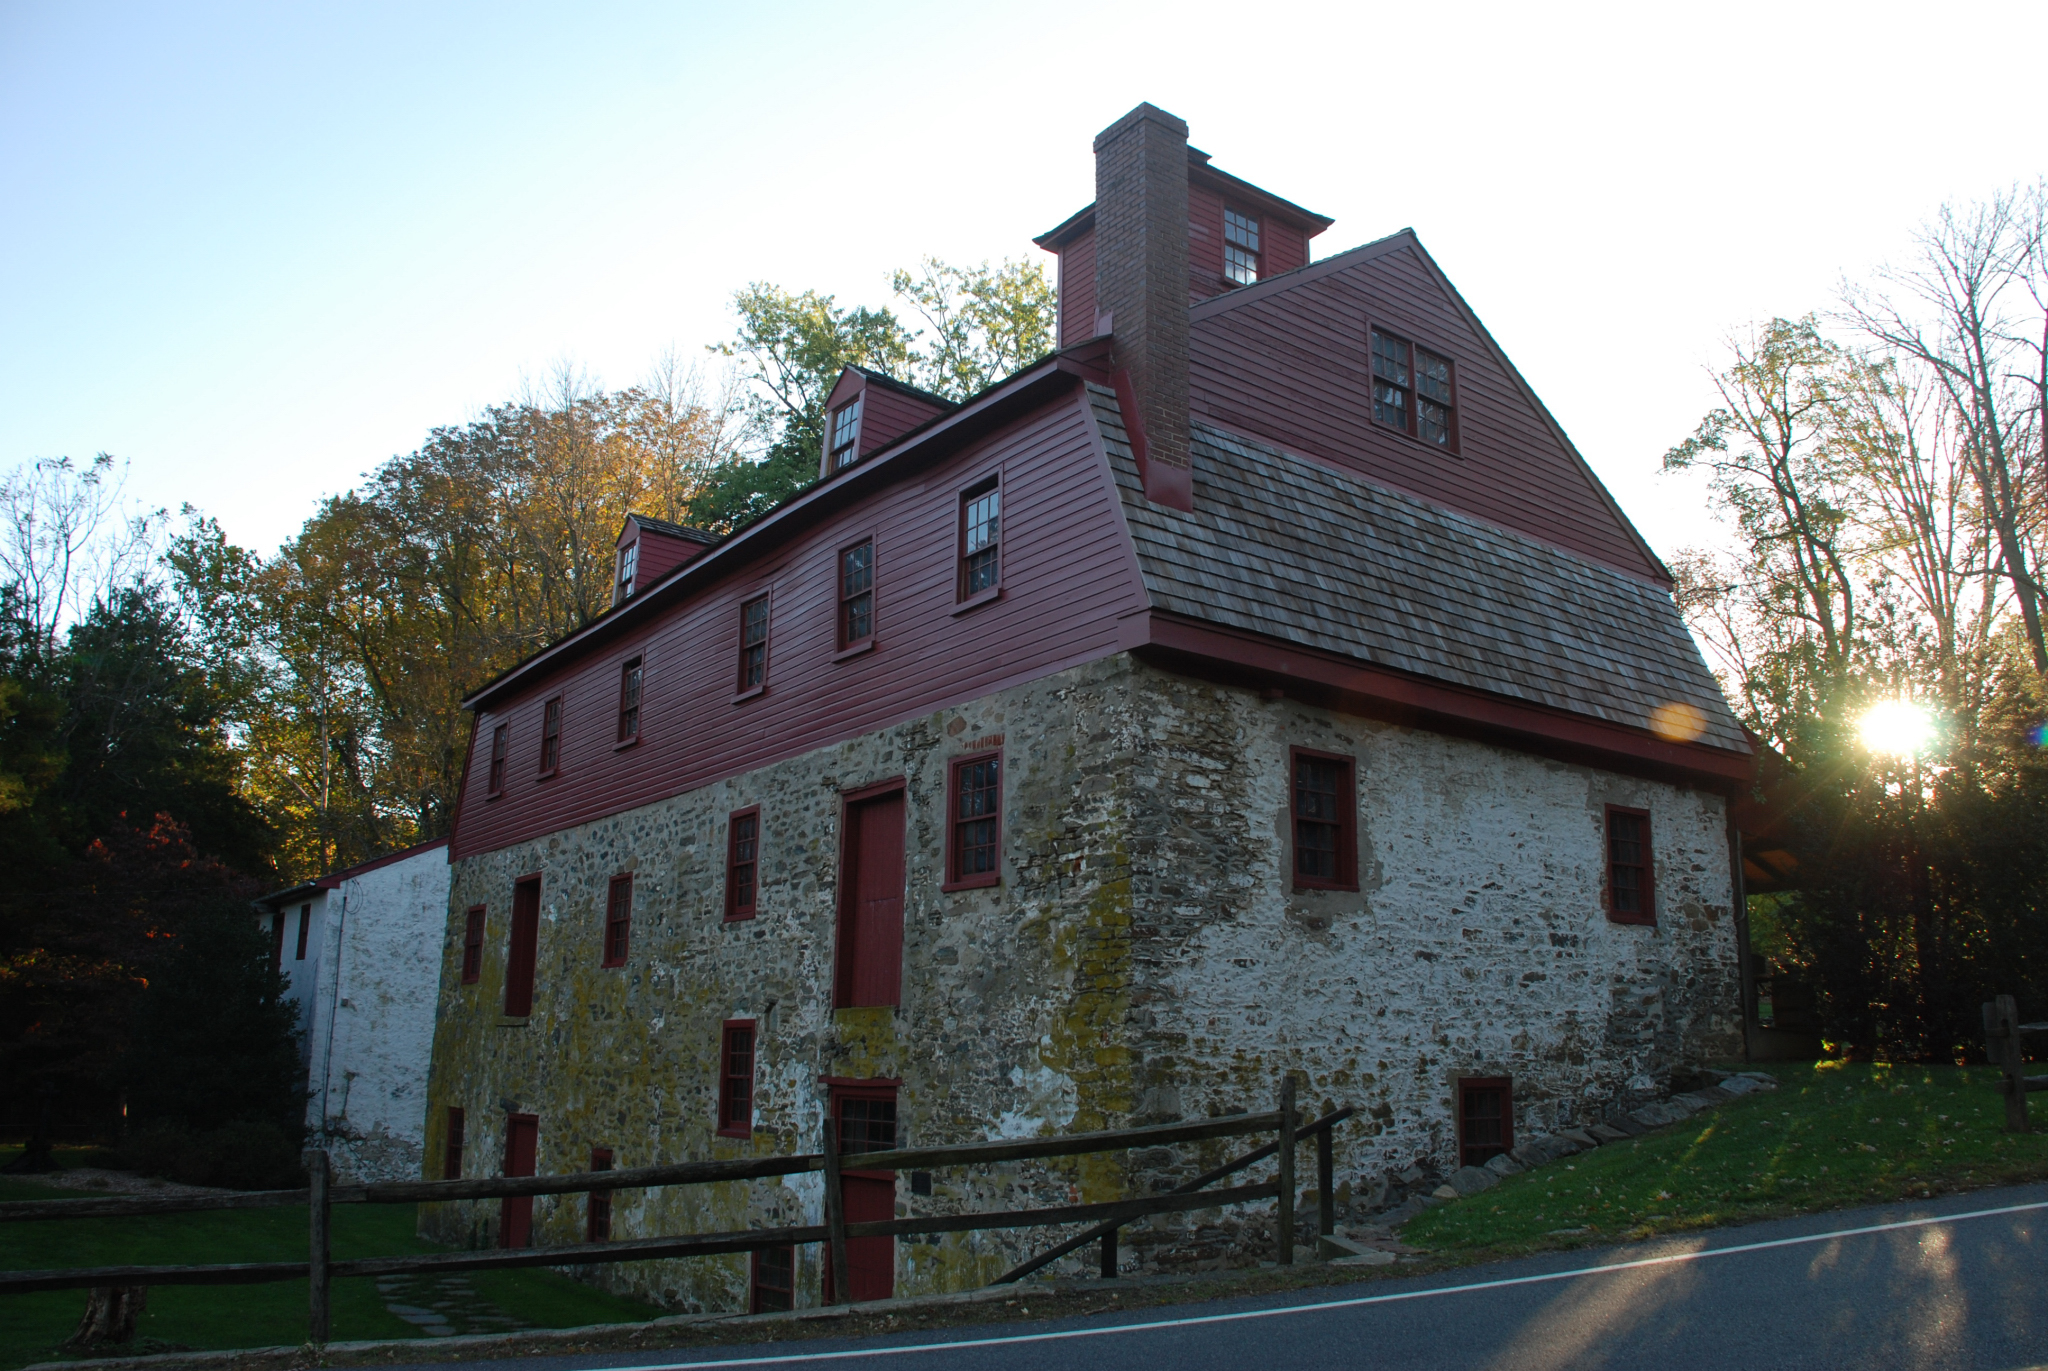 Exterior view of historic grist mill building